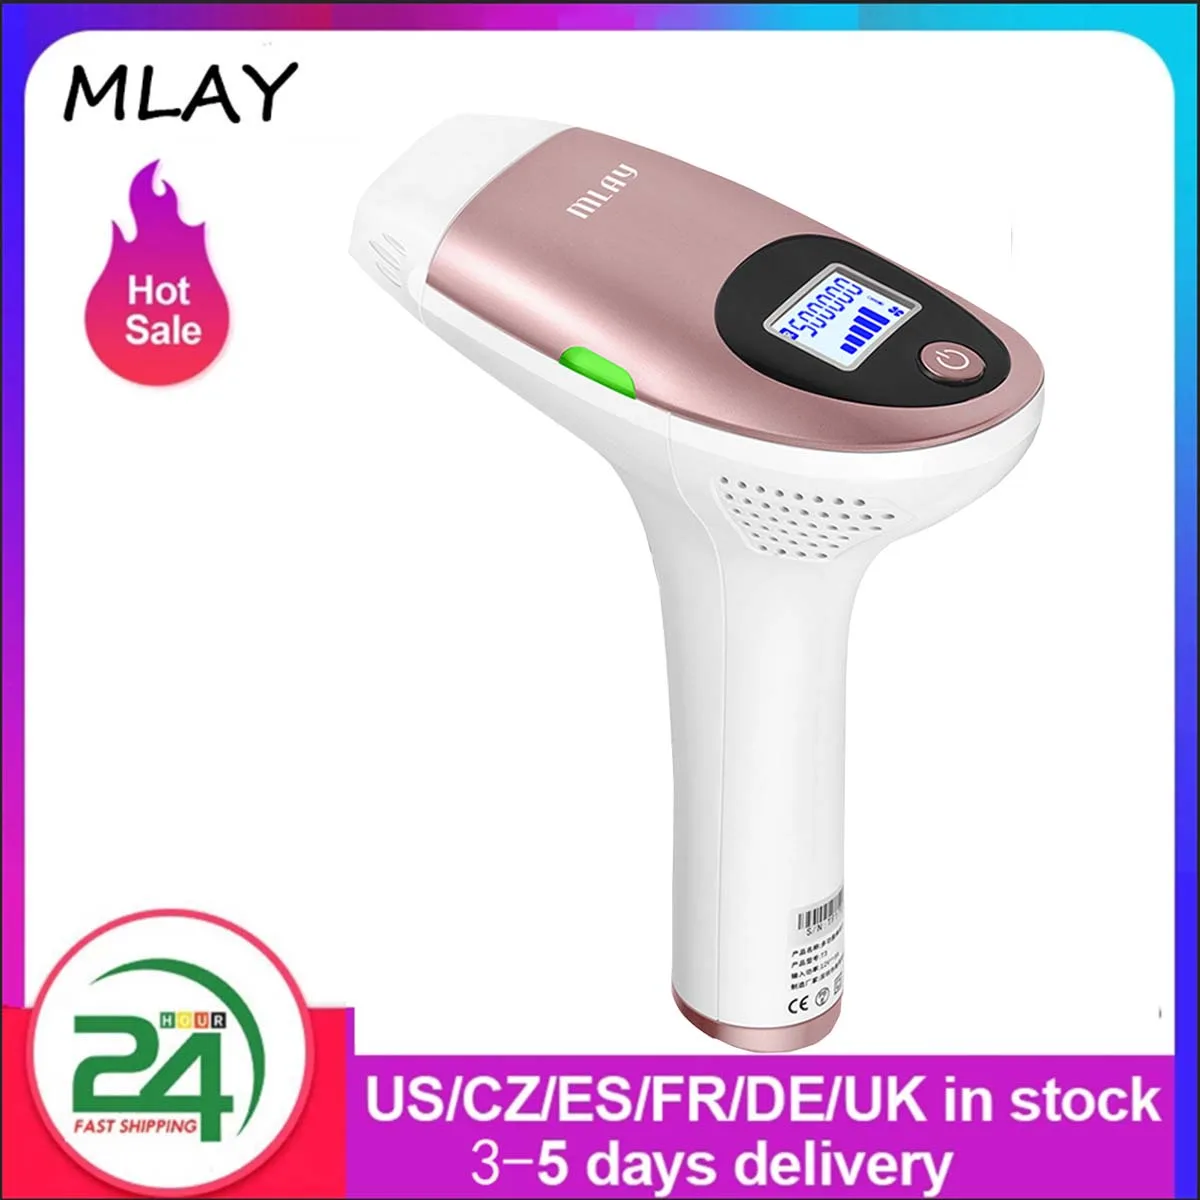 MLAY T3 IPL Laser Hair Removal Device Machine Permanent Electric Depilador Full Body Hair Removal Device Painless Personal Care